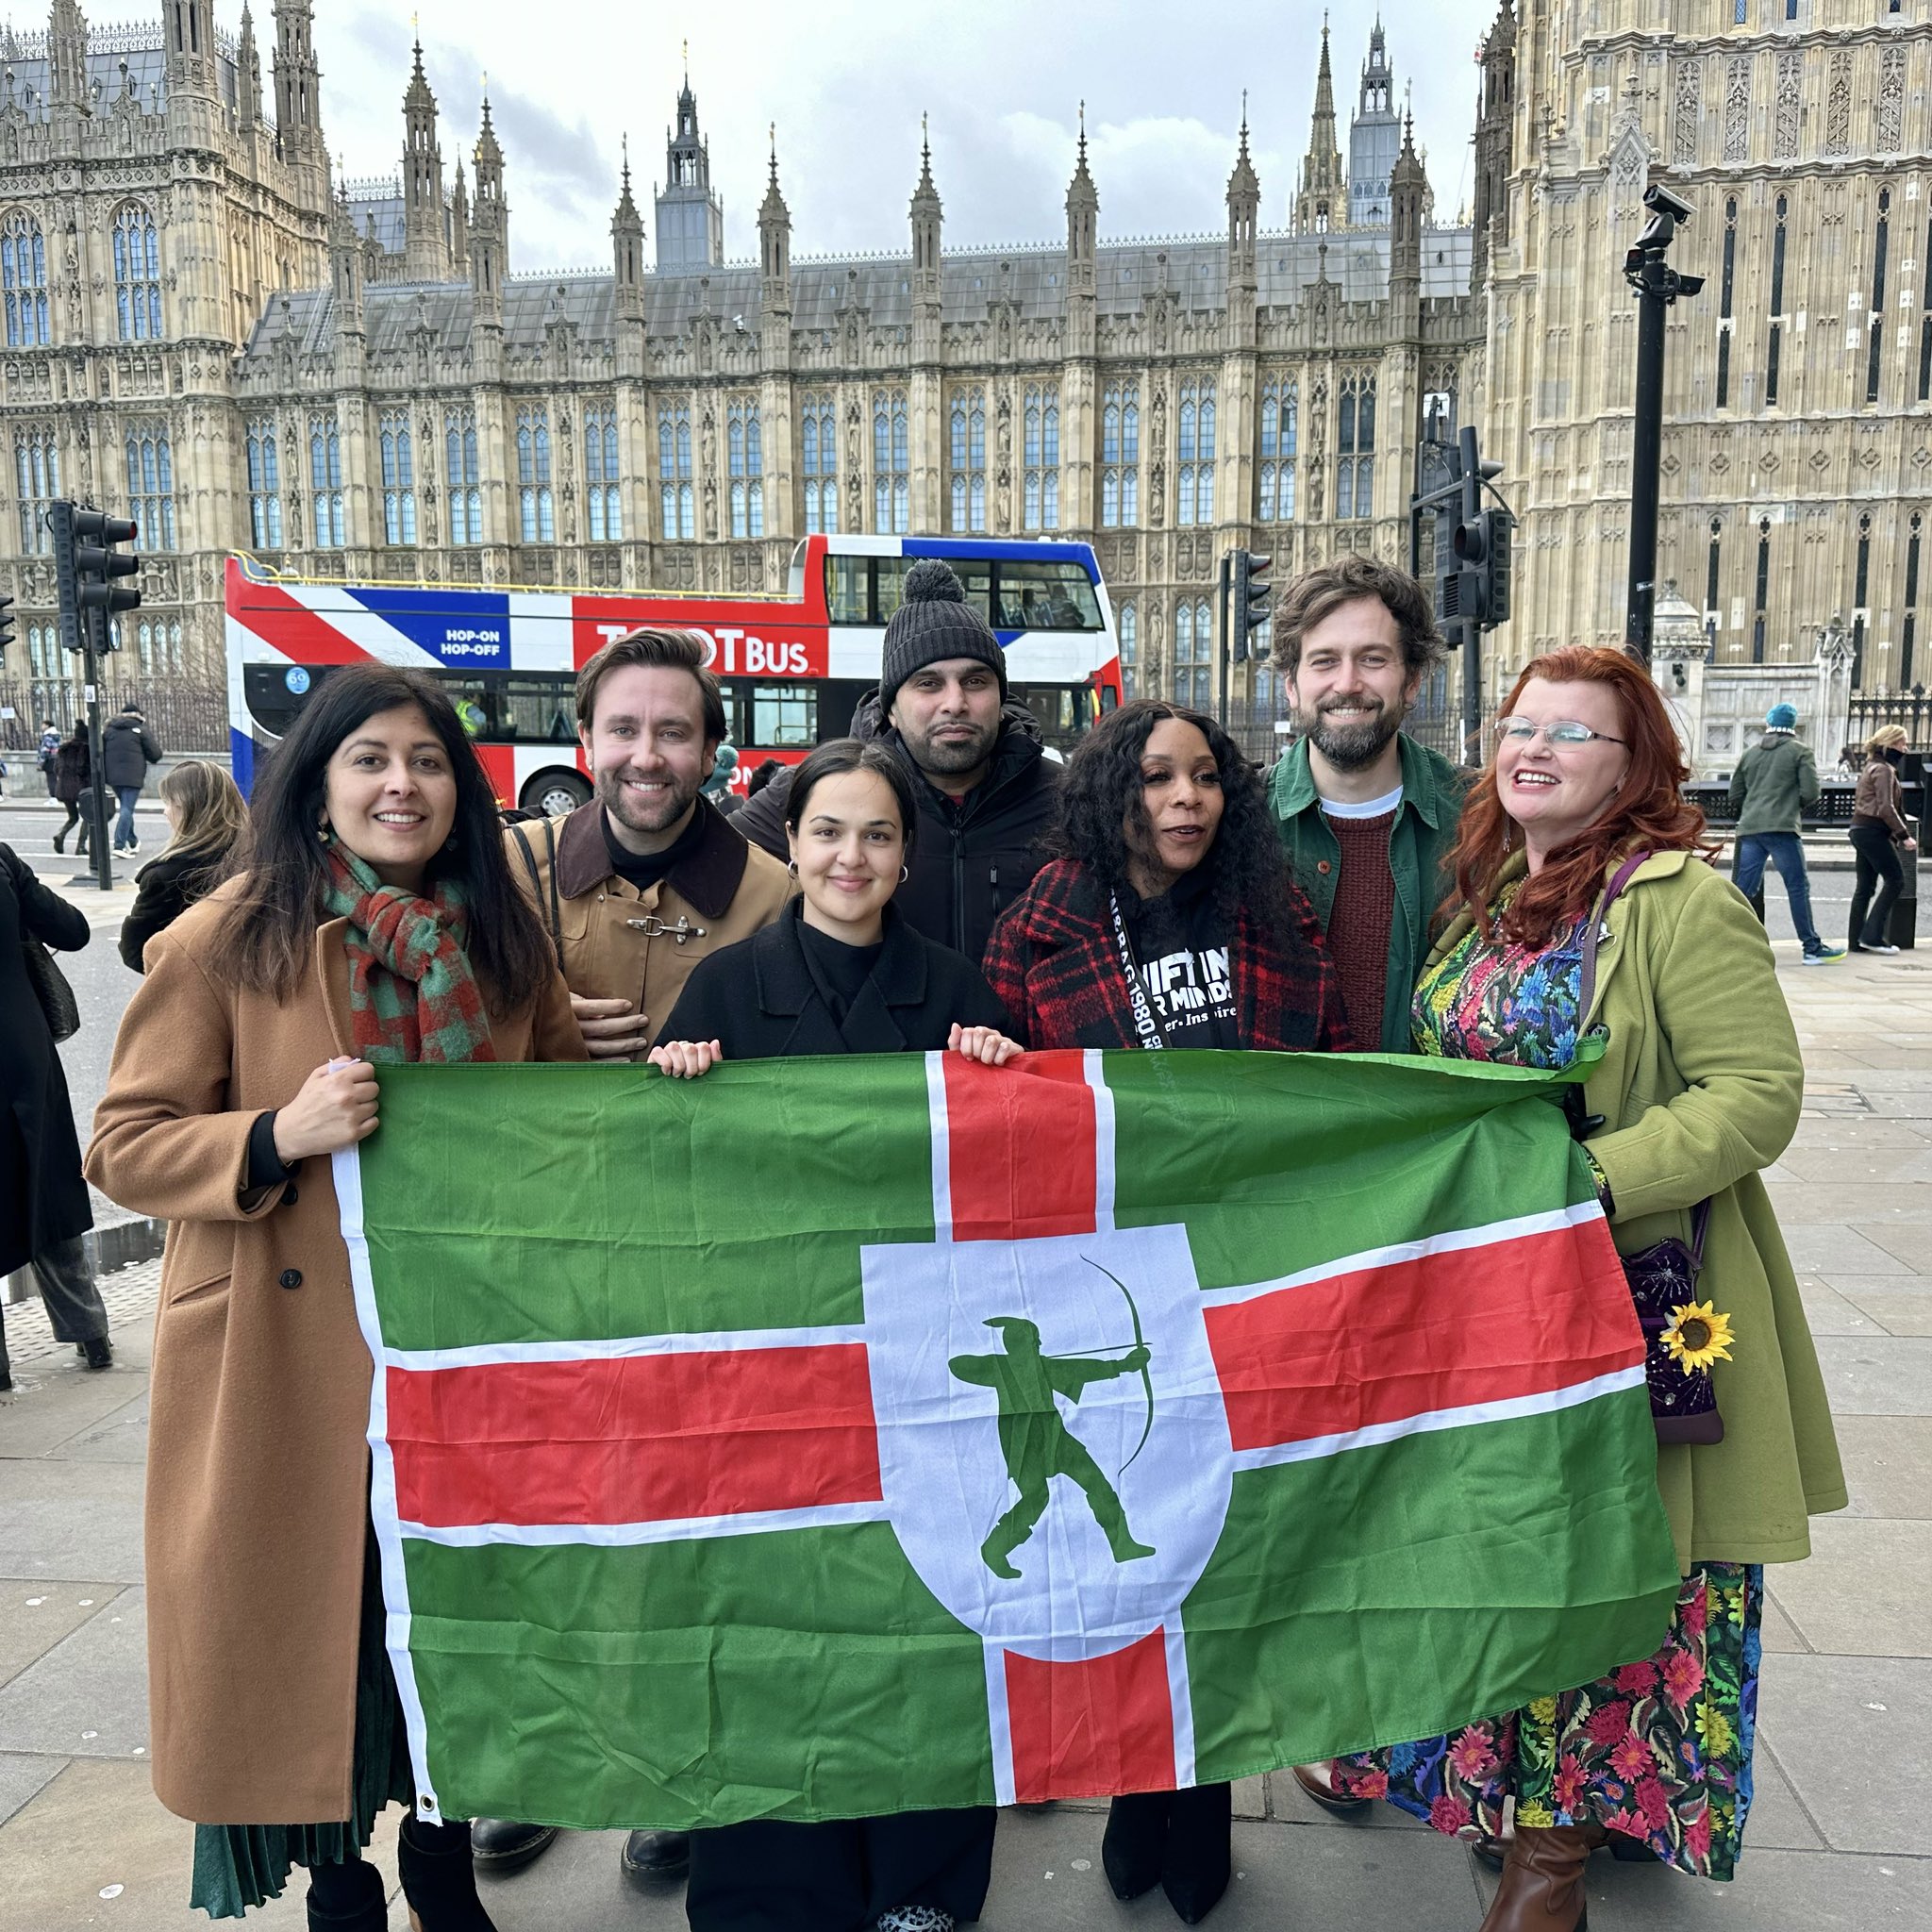 Nadia with Resolve Notts campaigners outside Parliament. They are holding the Nottingham flag.